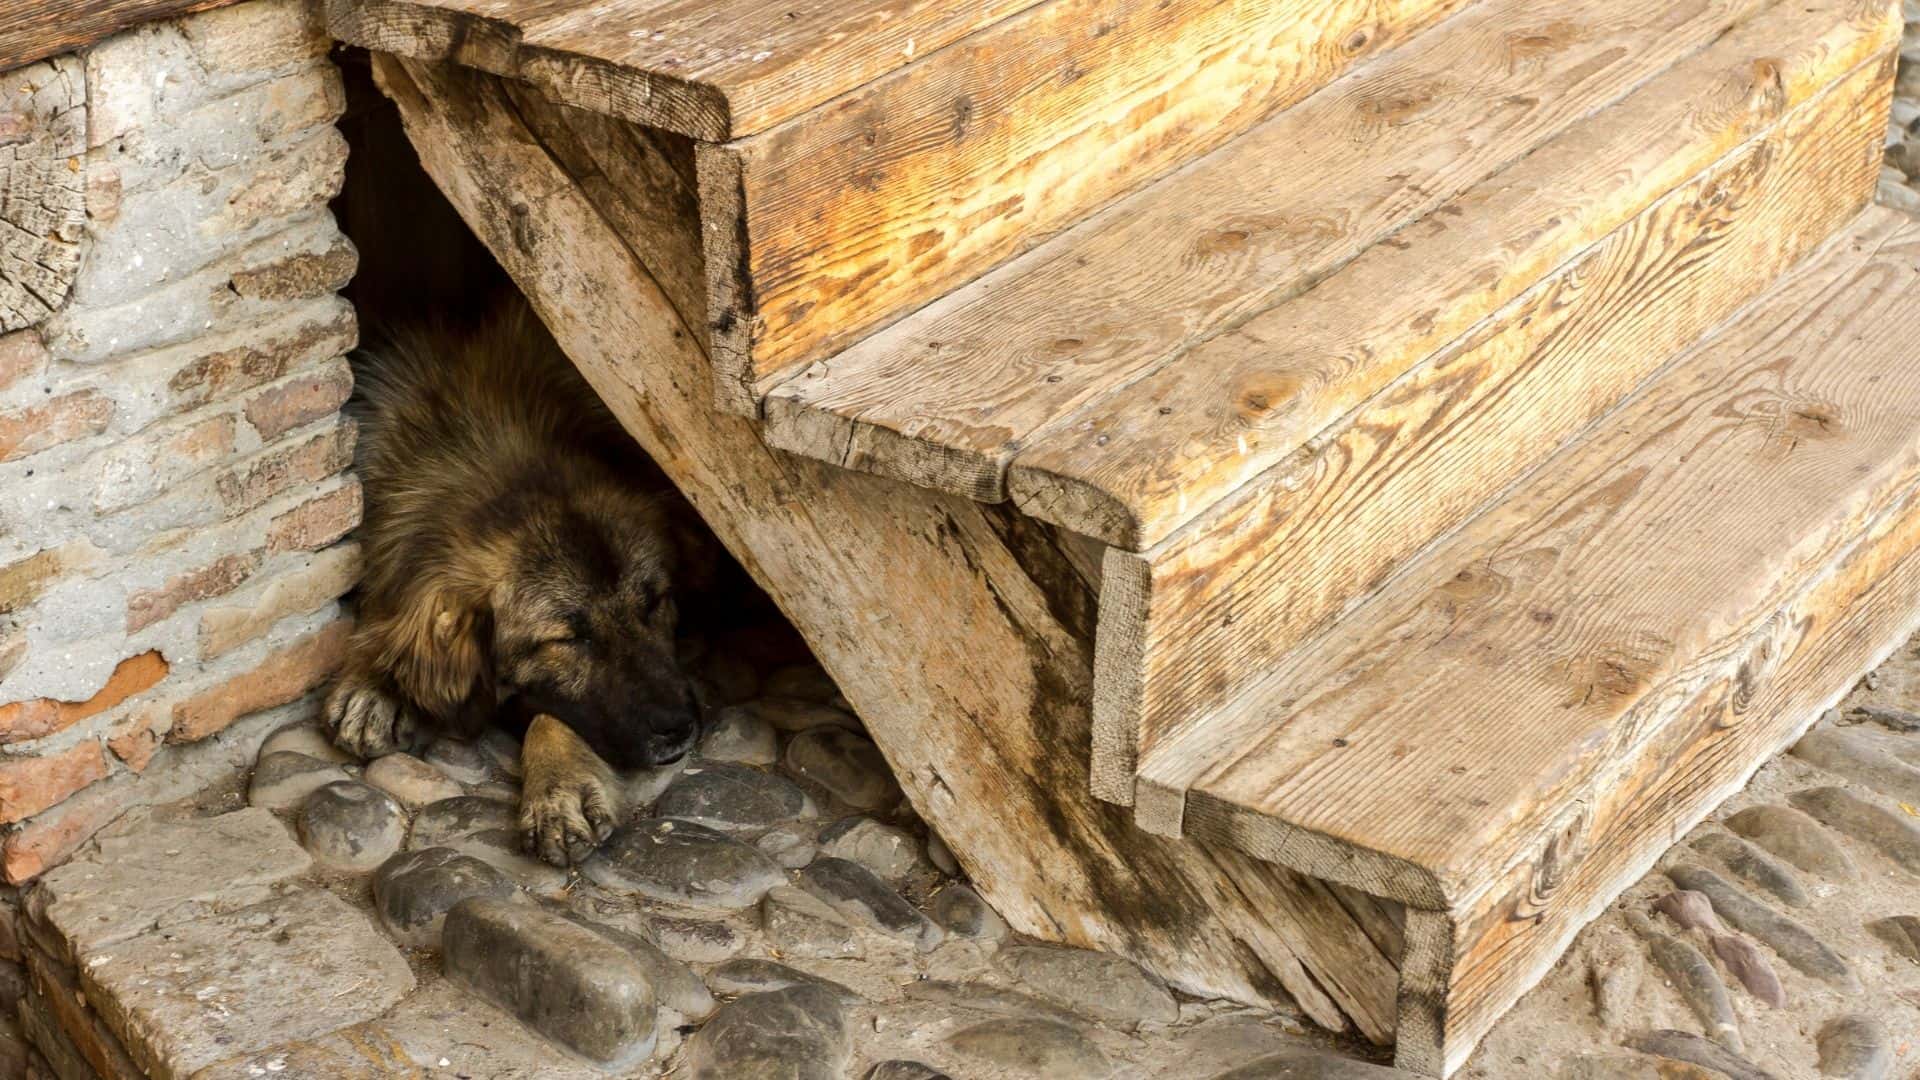 How to make a dog den under stairs?